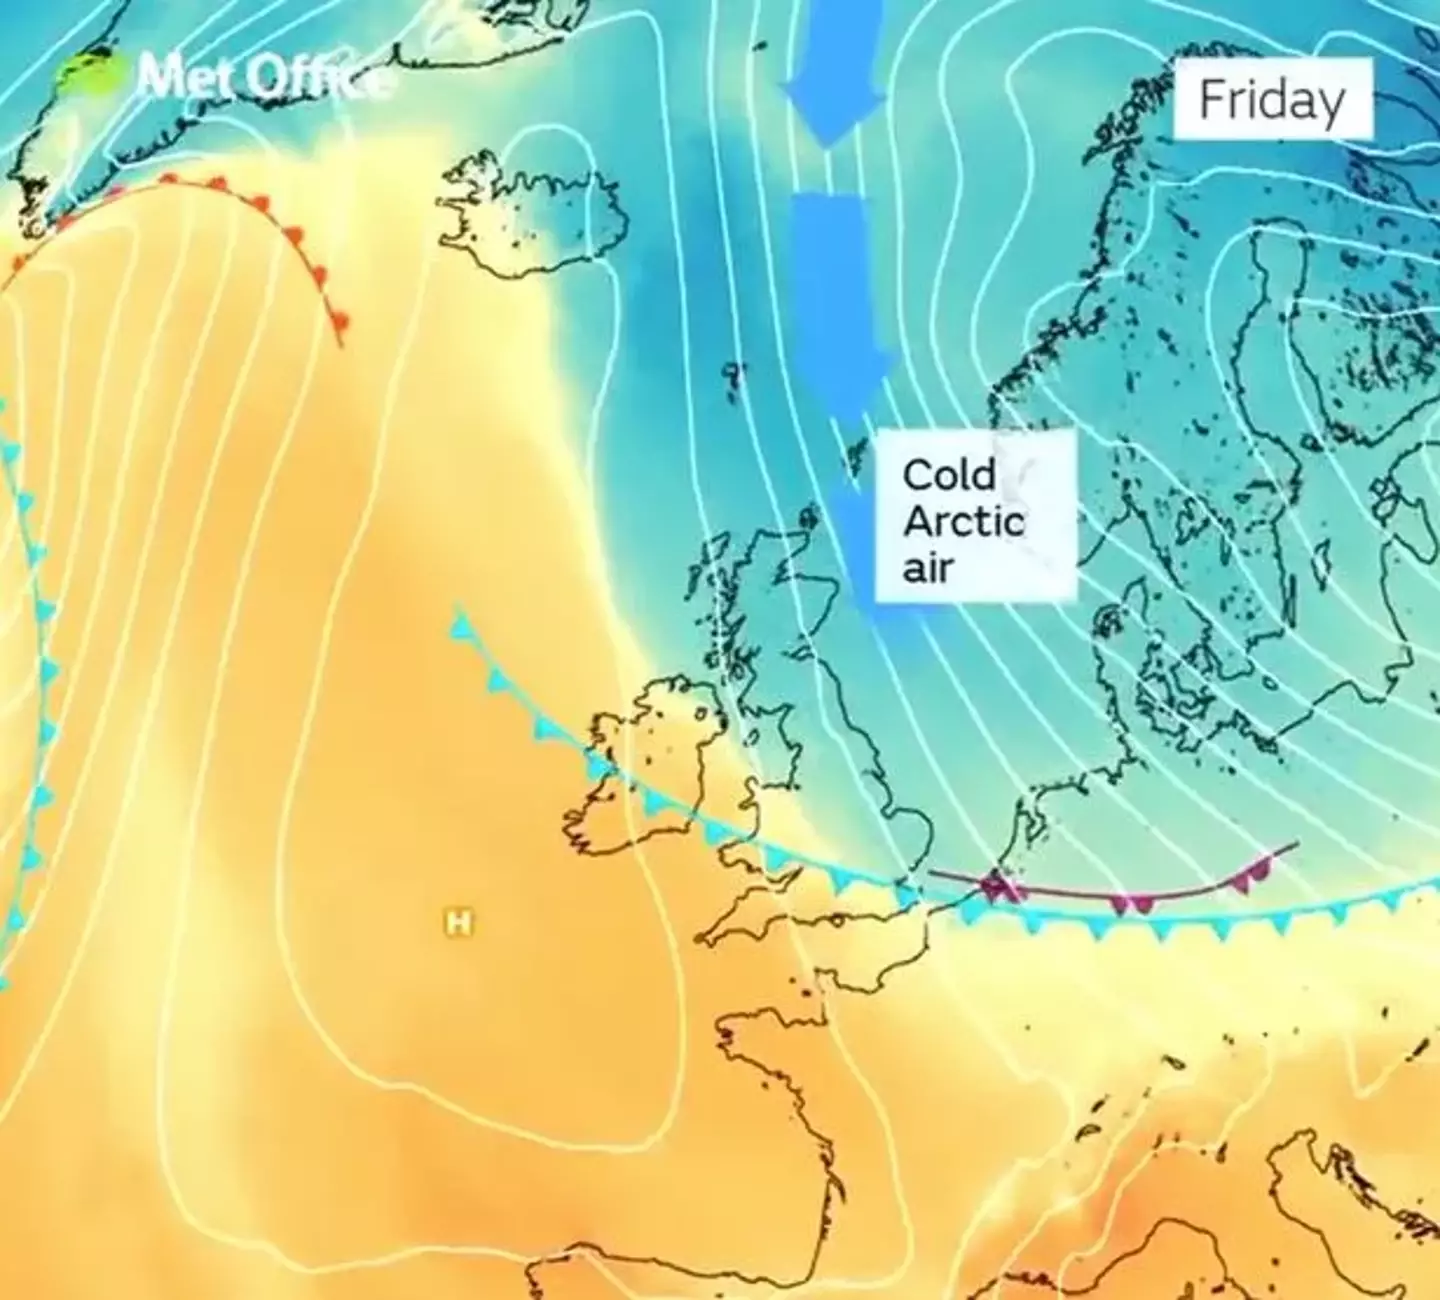 The Met Office revealed that this weekend's Arctic Blast began on Friday.